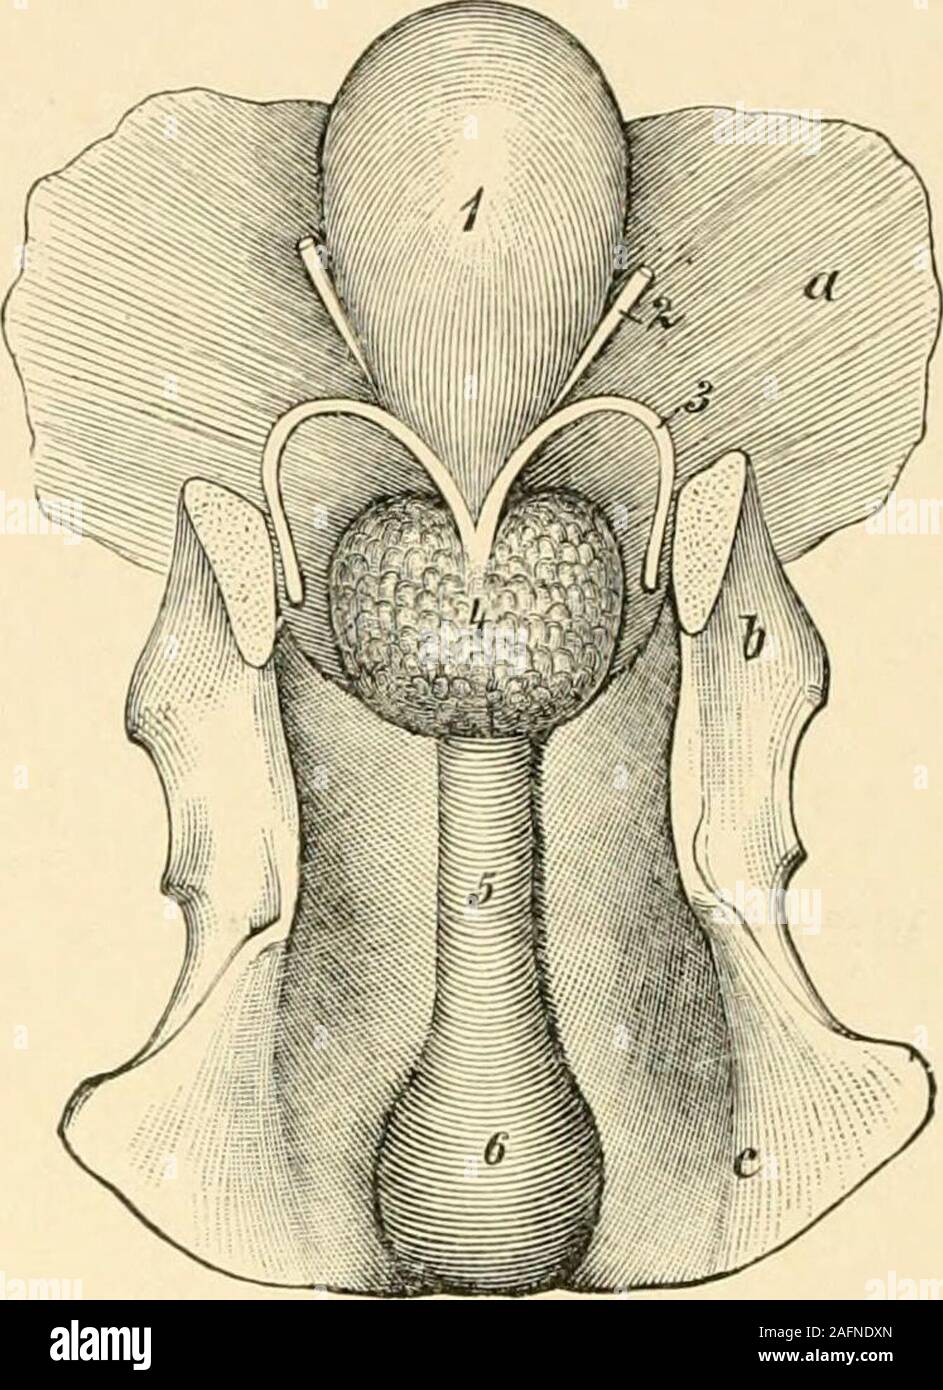 . Diseases of the dog and their treatment. Fig. 73.—.Speculums. Fig. 74.—Section through the pelvis of the male: 1, Bladder; 2, opening of the ureters intothe bladder; .3, spermatic ducts; 4, prostate gland;5, urethra, showing Wilsons muscle; 6, arch ofthe urethera; c, pelvis. It can be distinguished by manipvilation. It is a round, distended, tumor-like body, giving a dull sound on percussion. On examination of therectum we not only feel the neck of the bladder and the prostate, butthe bladder itself can be easily distinguished. Percussion in the region ofthe bladder when it contains a very l Stock Photo